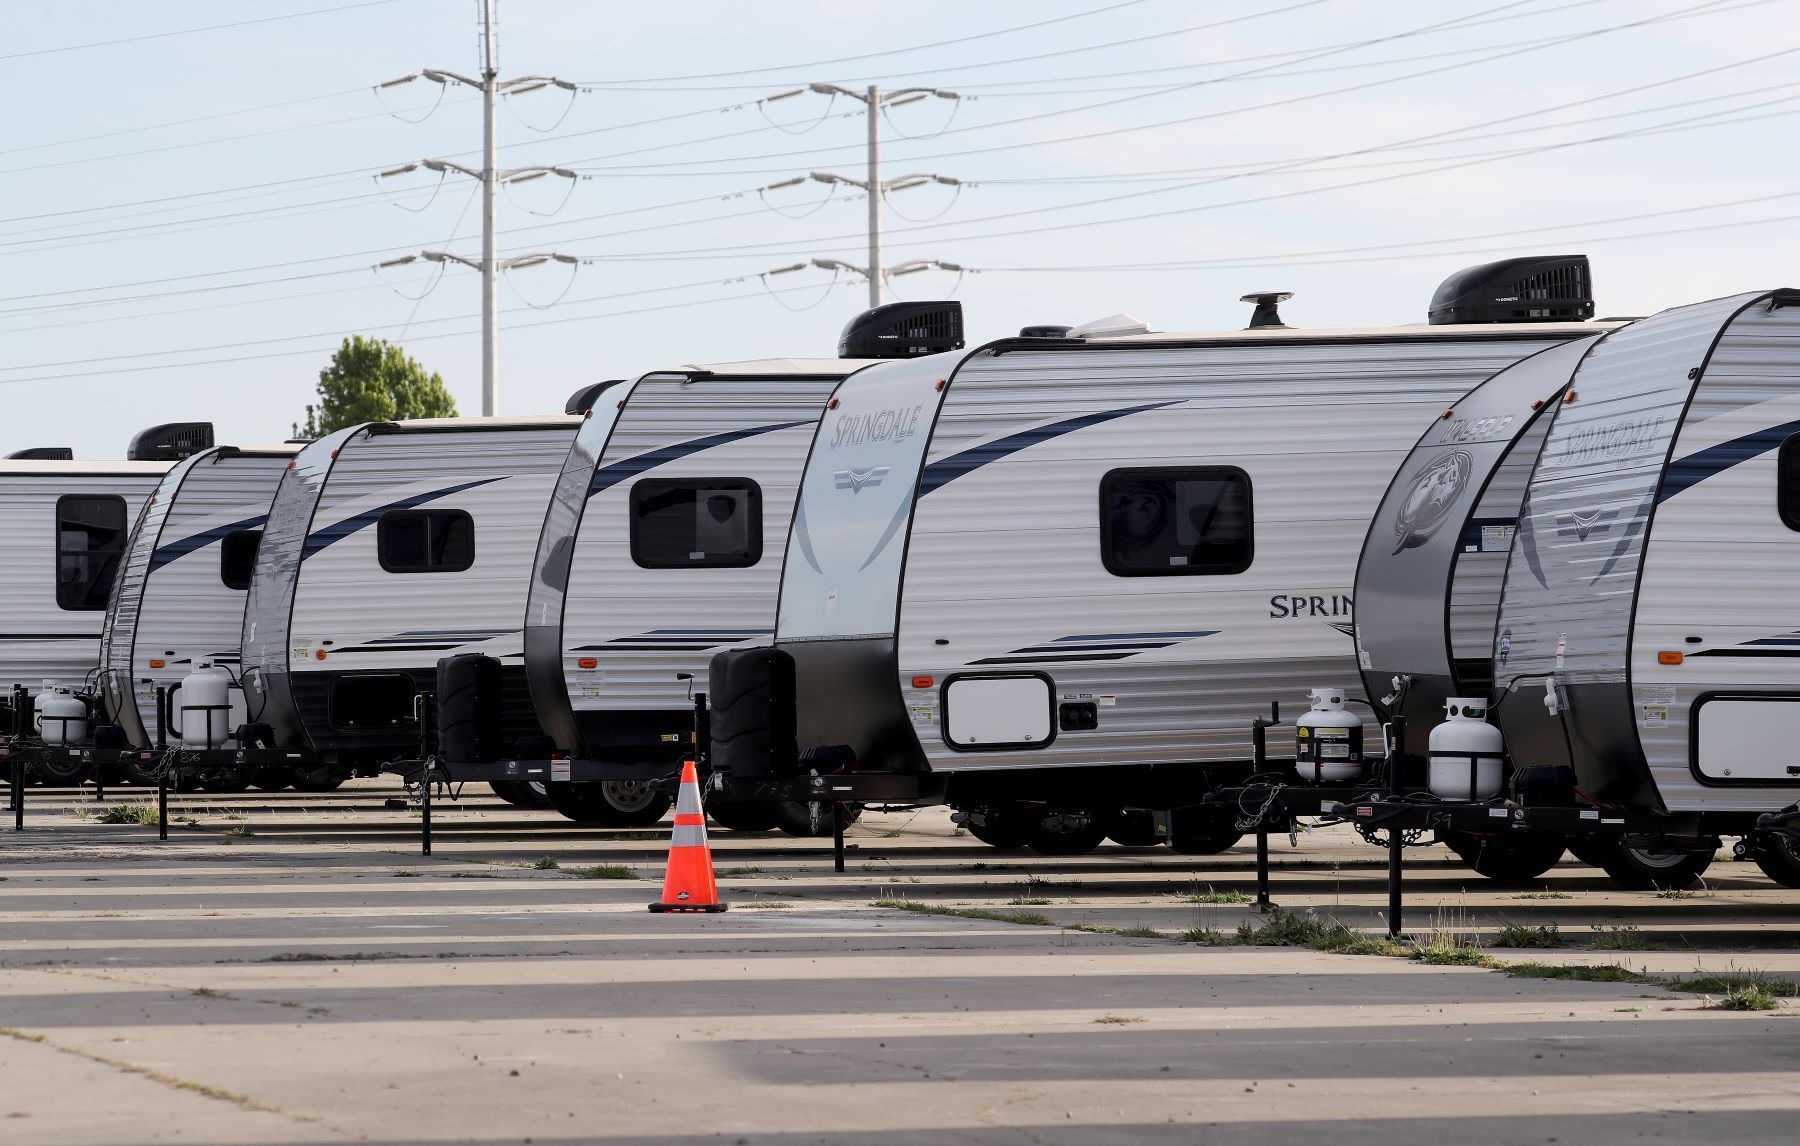 A homeless shelter consisting of RV campers and trailers in Oakland, California